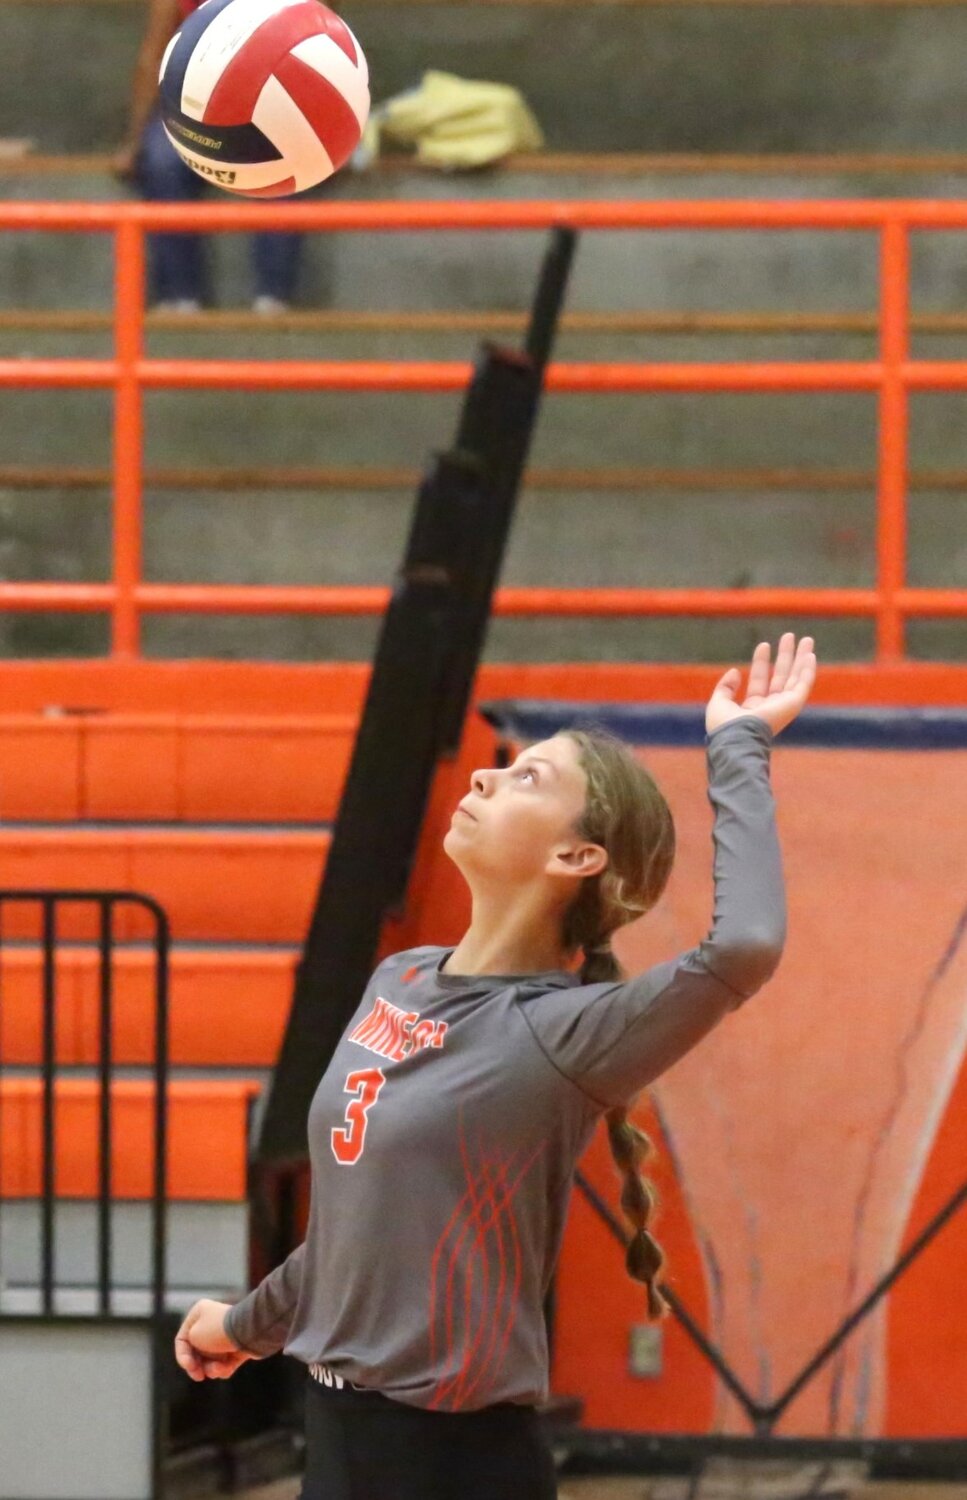 Caroline Castleberry’s six service aces played a big role in dispatching the Grapeland Sandiettes in straight sets last Tuesday.